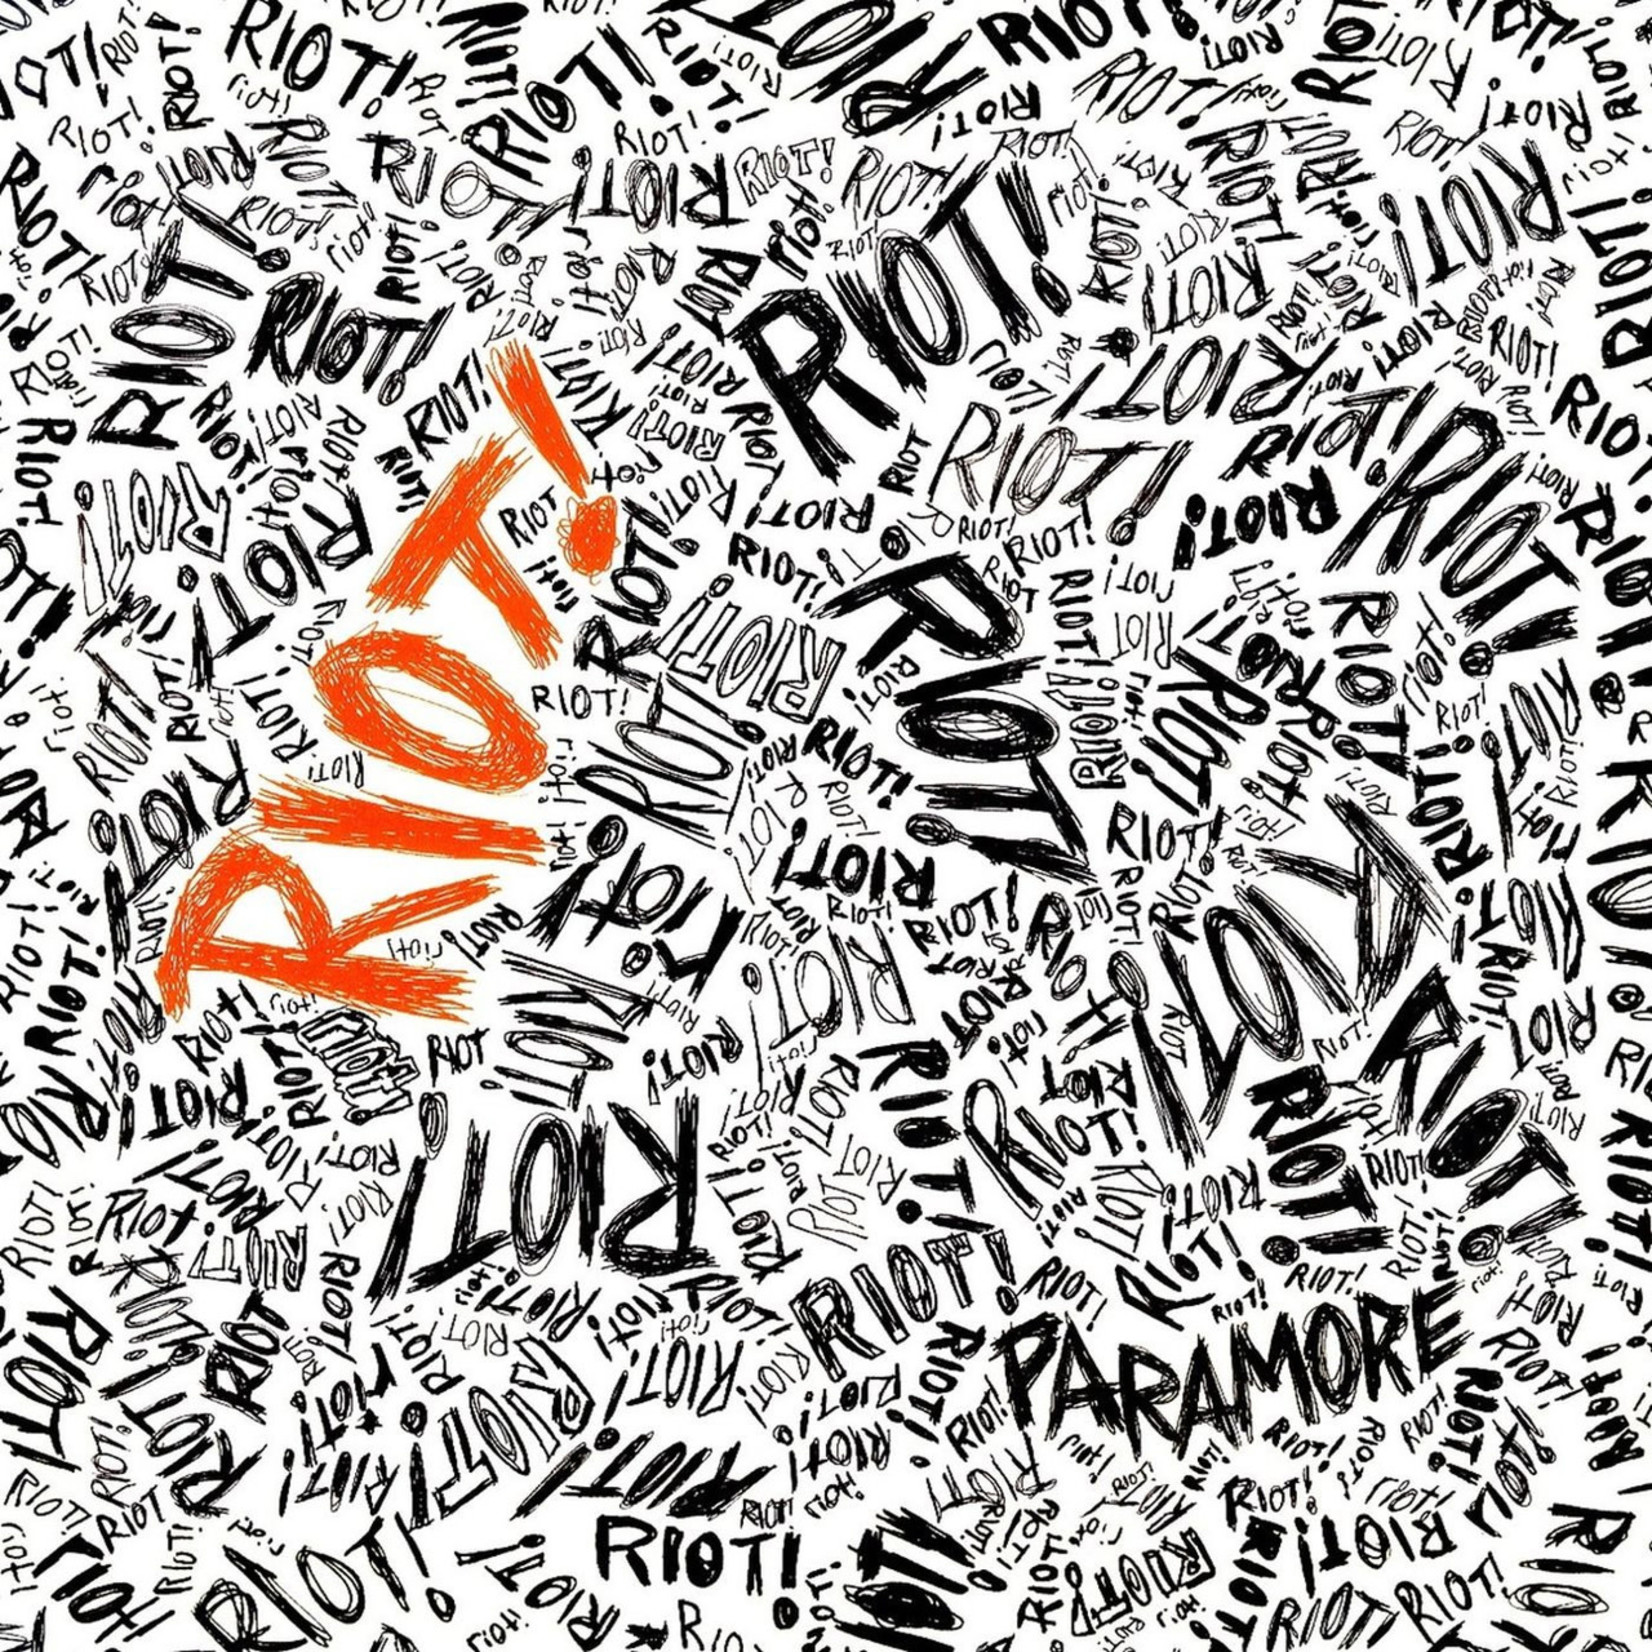 [New] Paramore - Riot! (Limited 25th Anniversary Ed., silver vinyl)